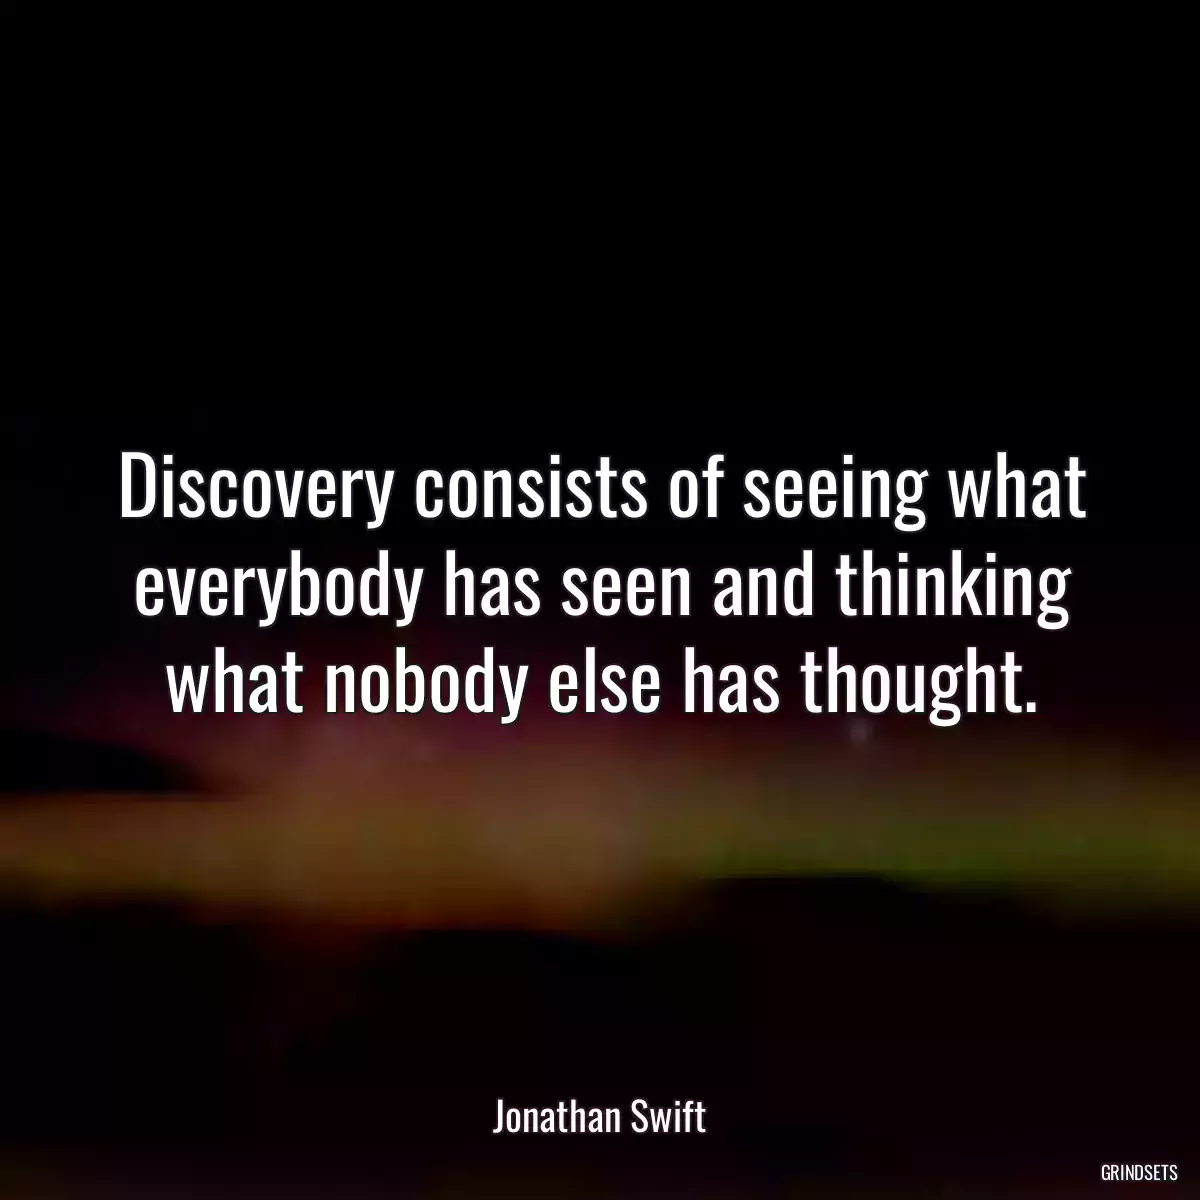 Discovery consists of seeing what everybody has seen and thinking what nobody else has thought.